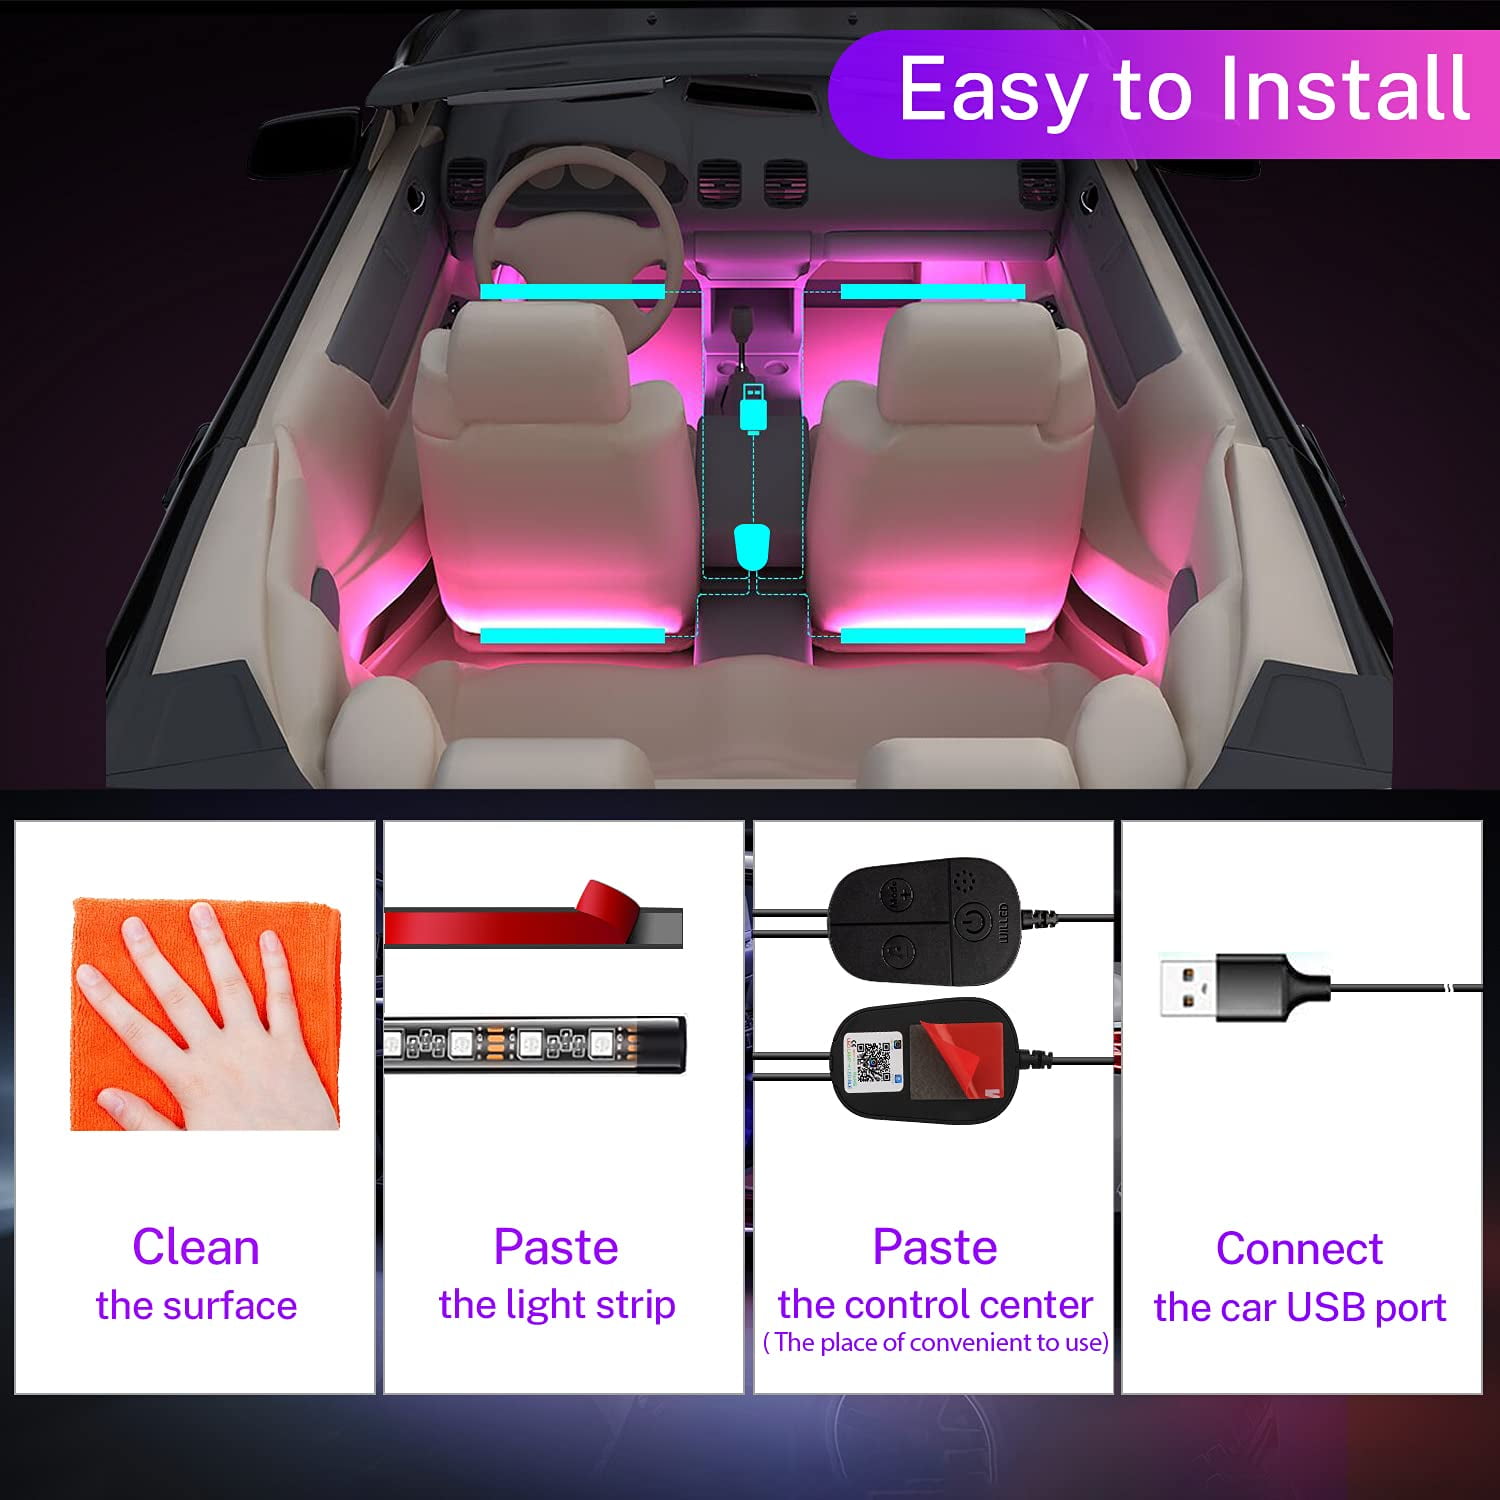 WILLED Car LED Interior Lights, App Control Smart Car Lights with